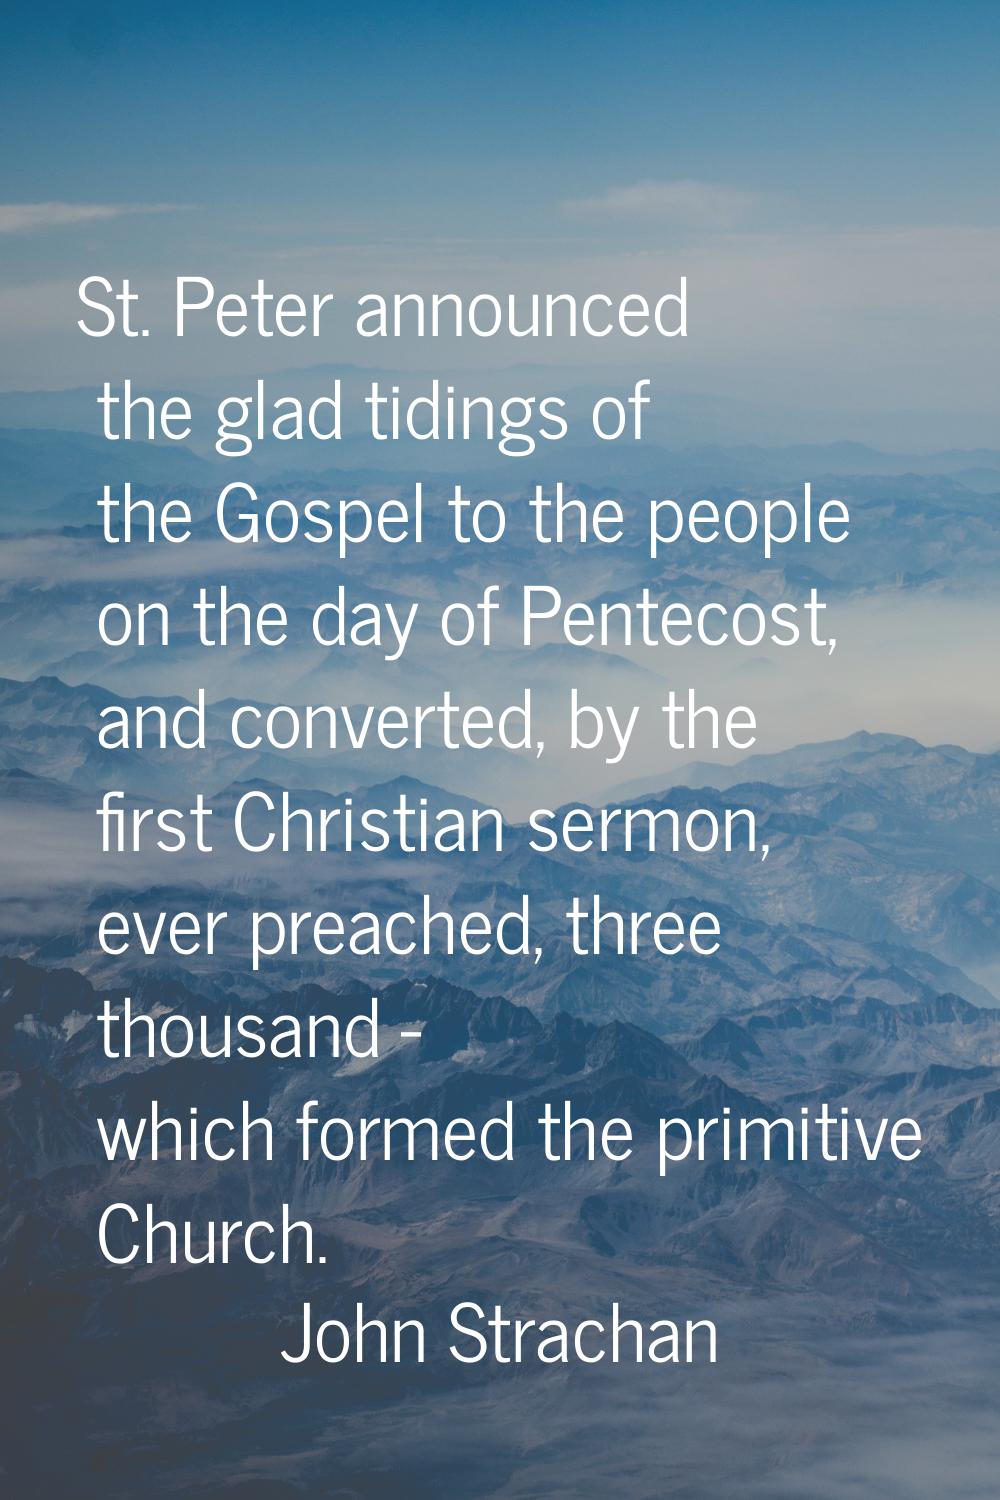 St. Peter announced the glad tidings of the Gospel to the people on the day of Pentecost, and conve